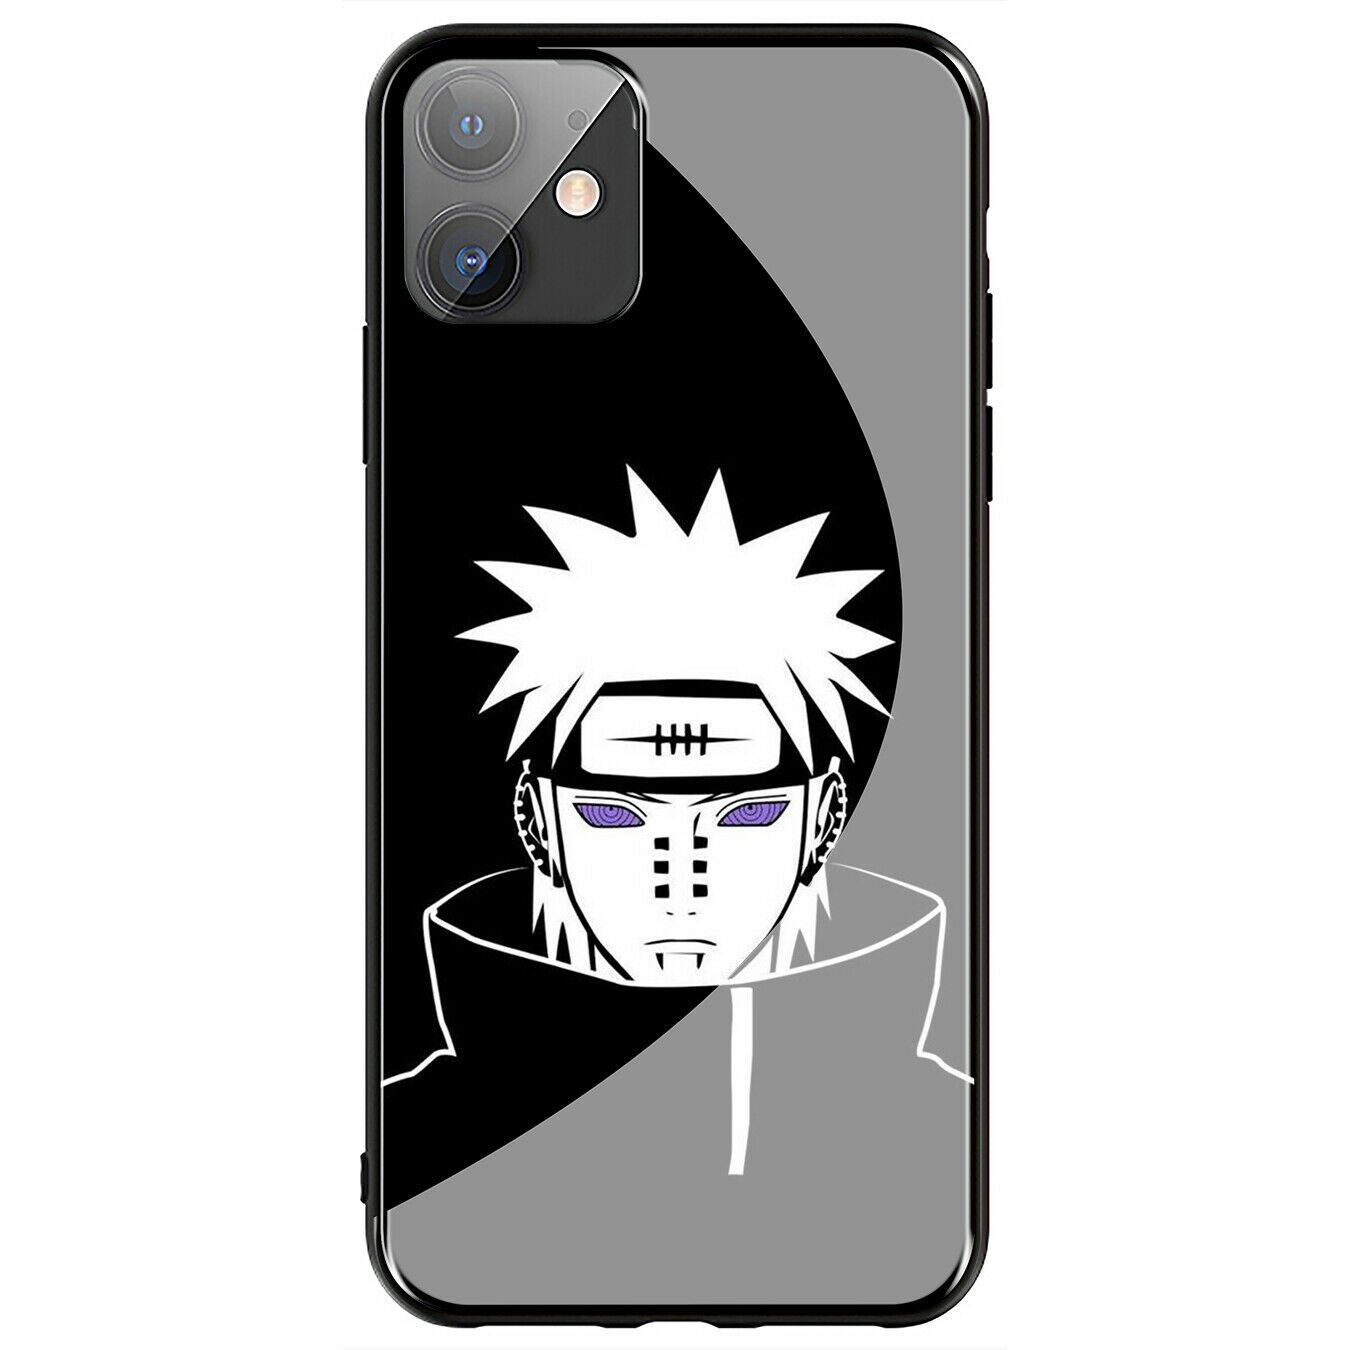 Sasuke NARUTO Akatsuki Glass Case for iPhone 11 Pro XR X XS Max 8 7 6 6s Plus + iPhone Cases AtlasCase 10 for iPhone 6/6S 